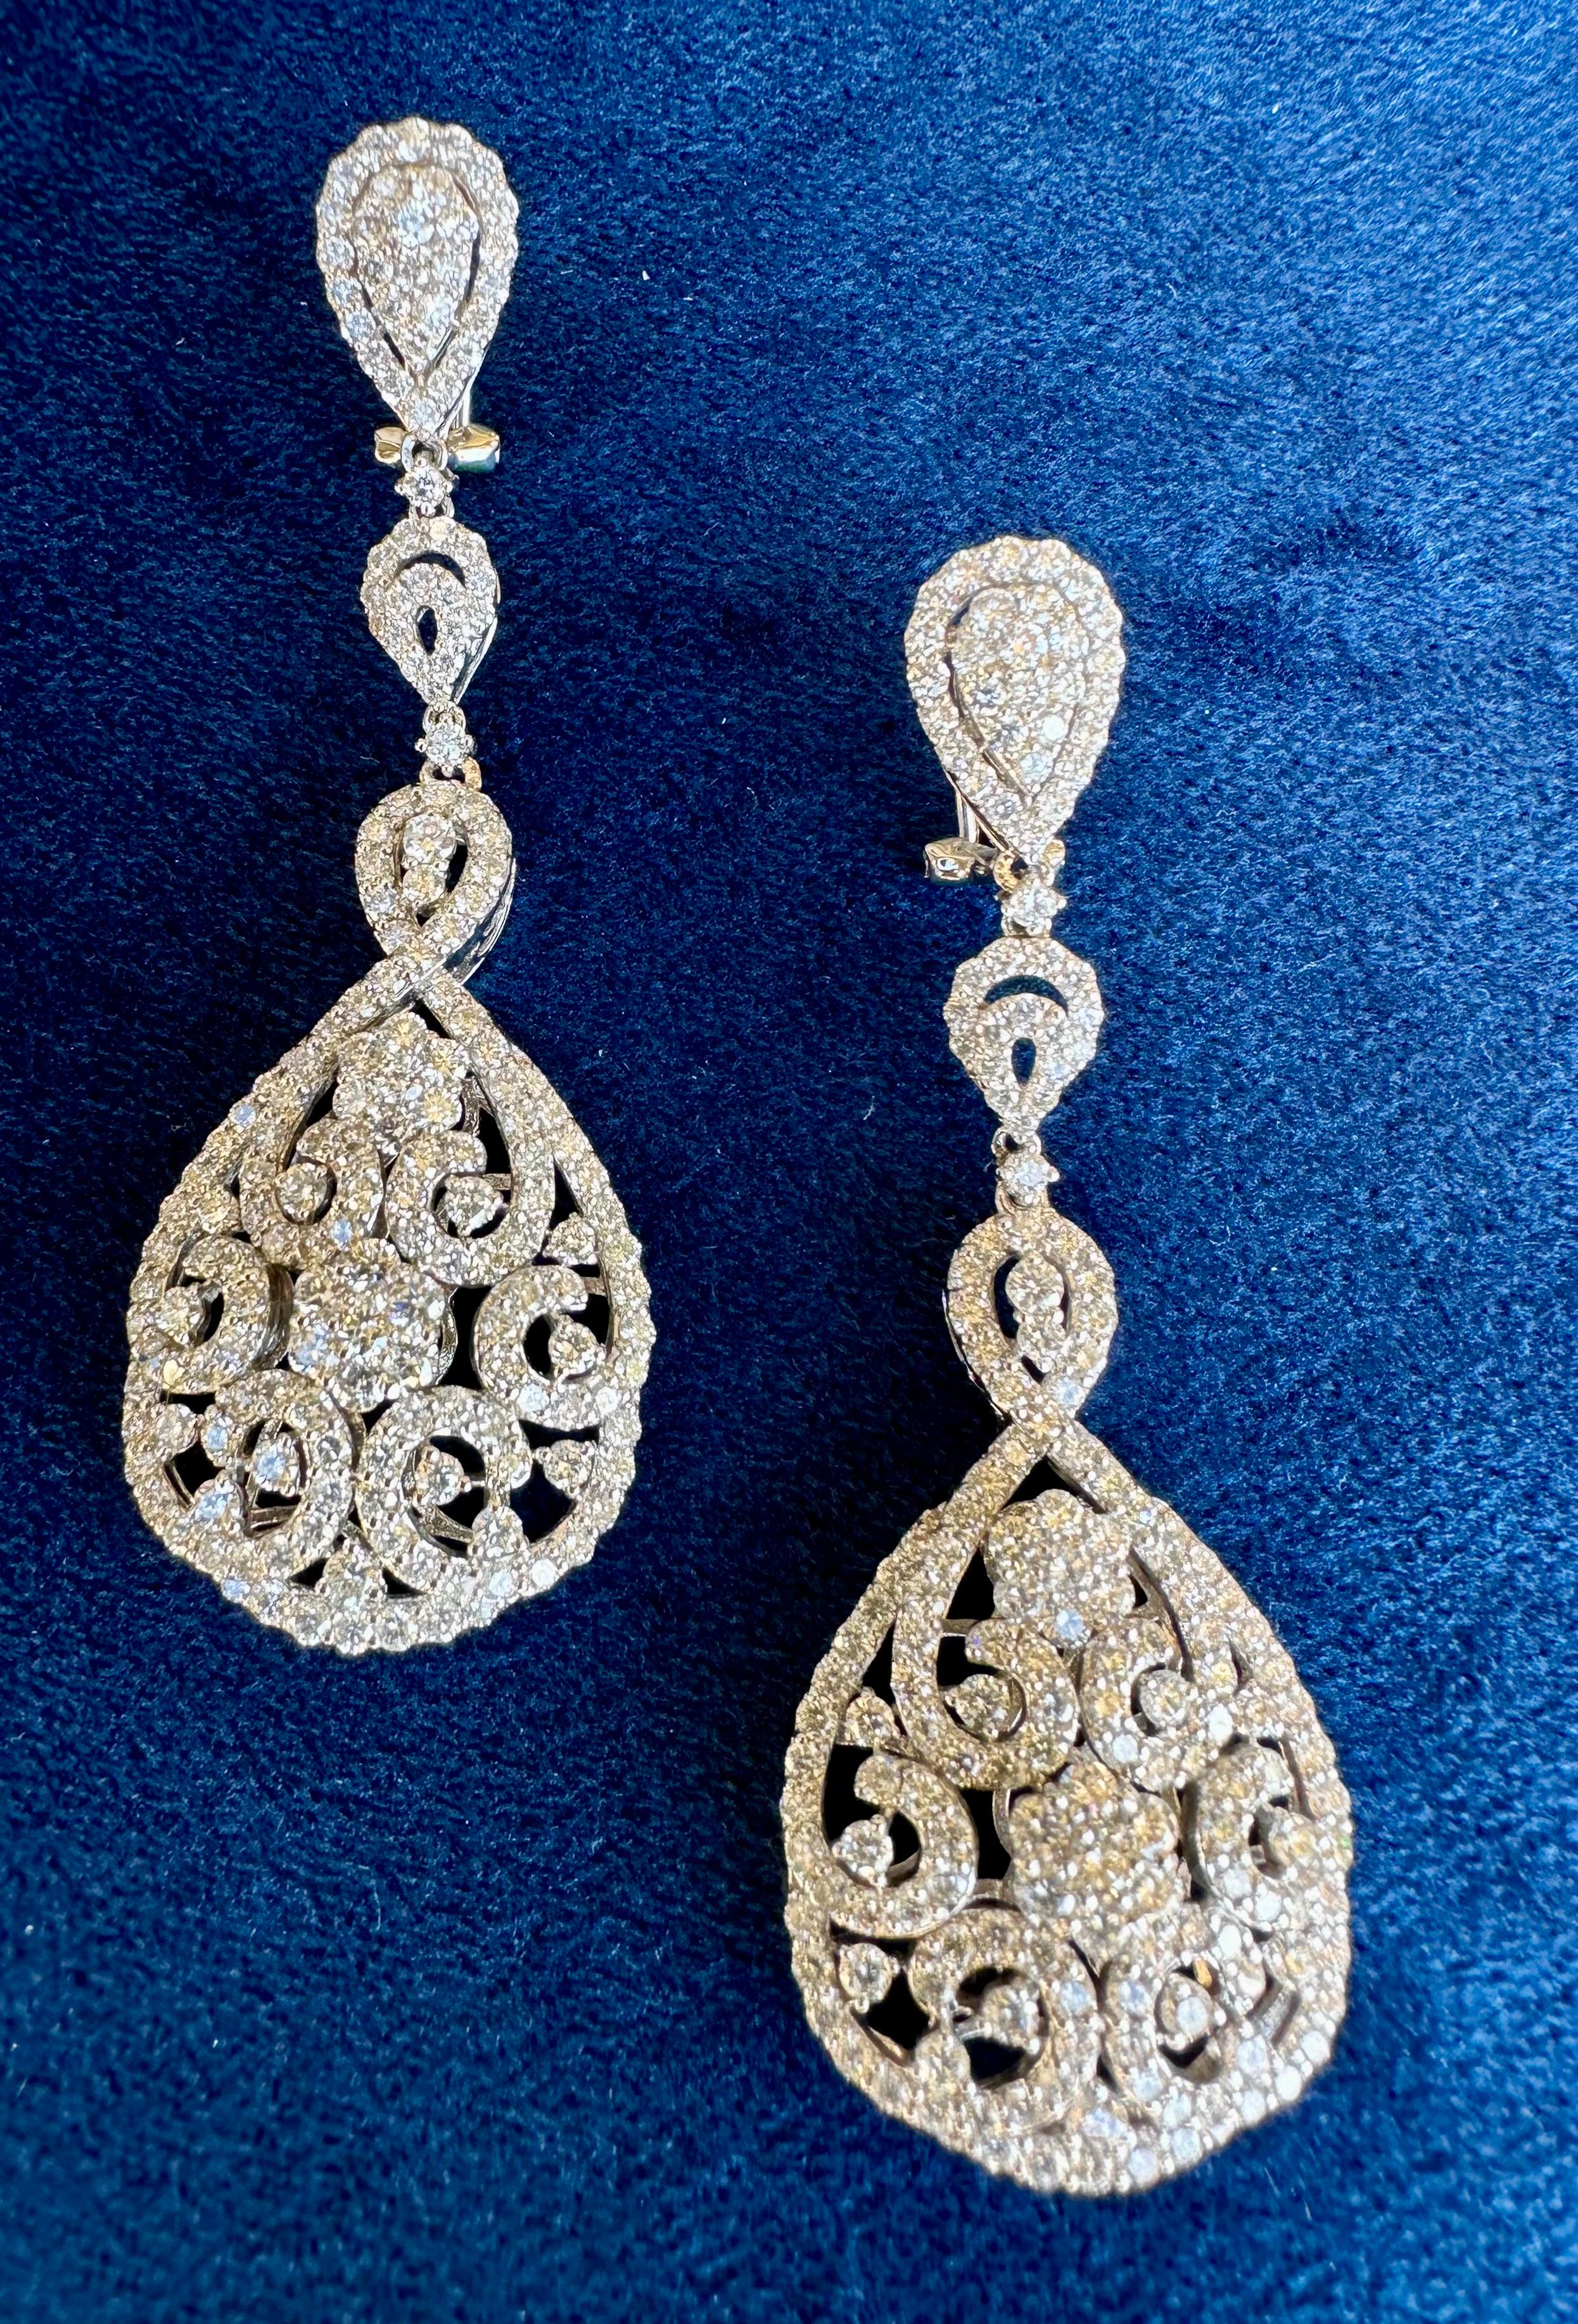  Elegant 15 Carat Diamond Pear Shaped Cluster Drop Earrings 18 Karat White Gold In Excellent Condition For Sale In Tustin, CA